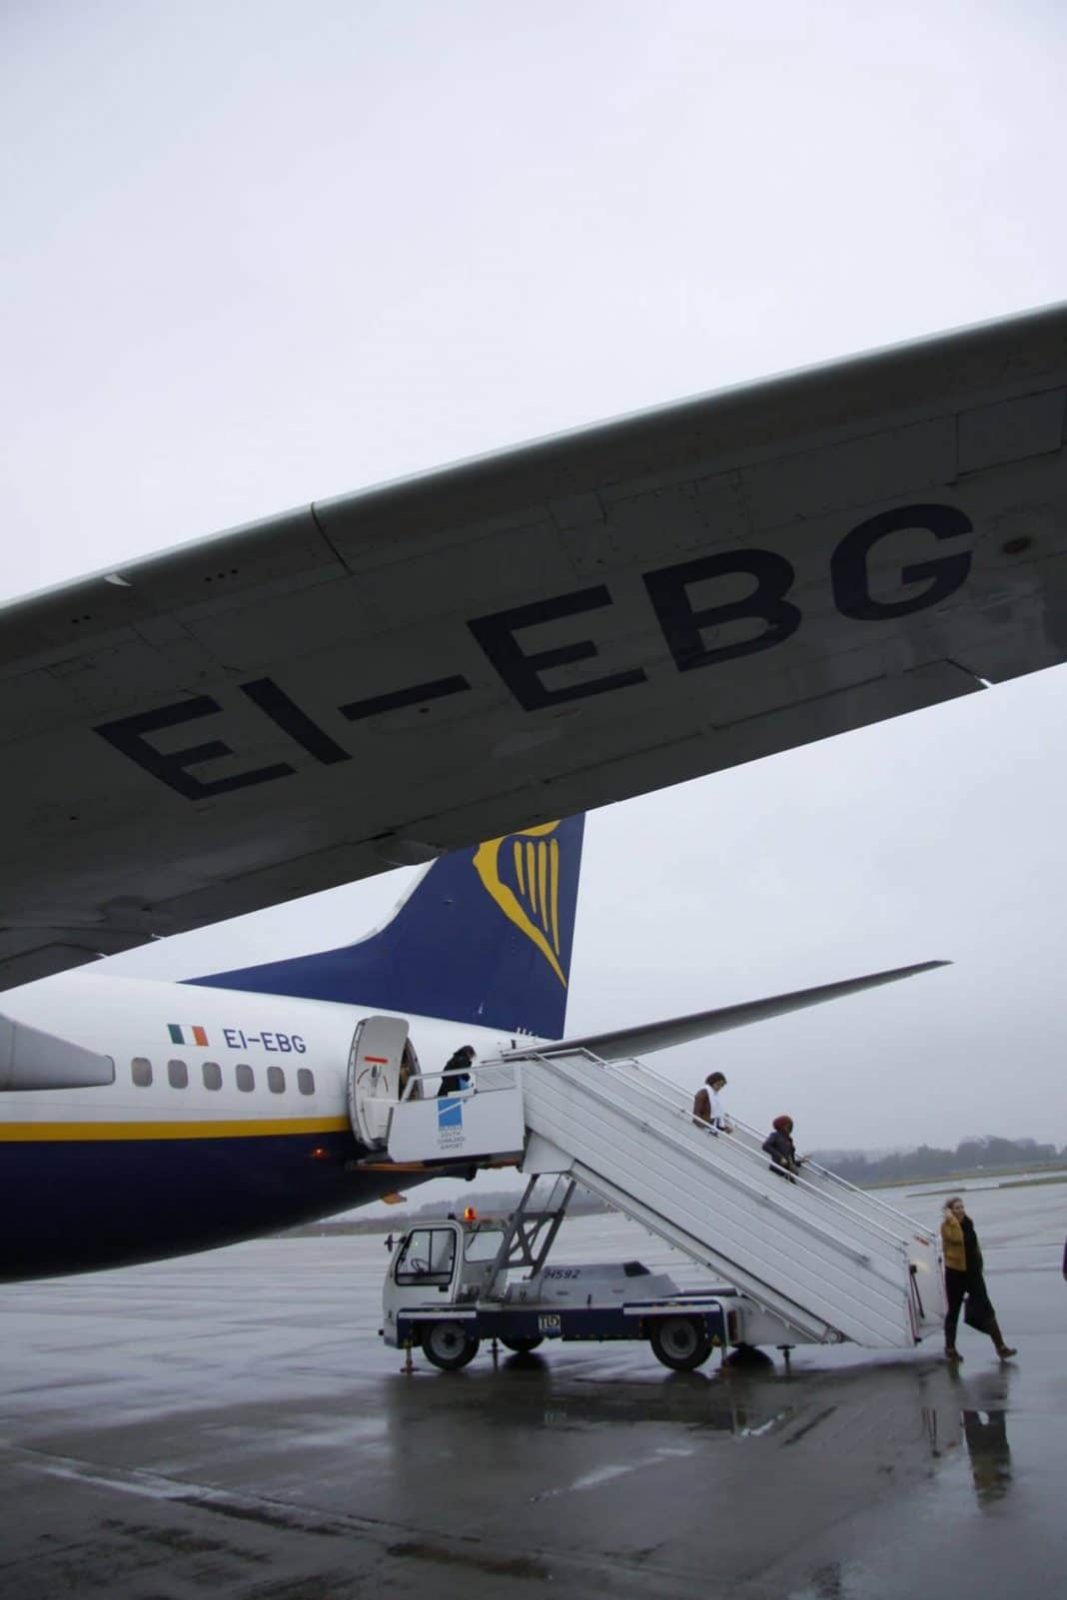 Ryanair aircraft seized at Bordeaux Airport; authorities seized the aircraft over unpaid debts